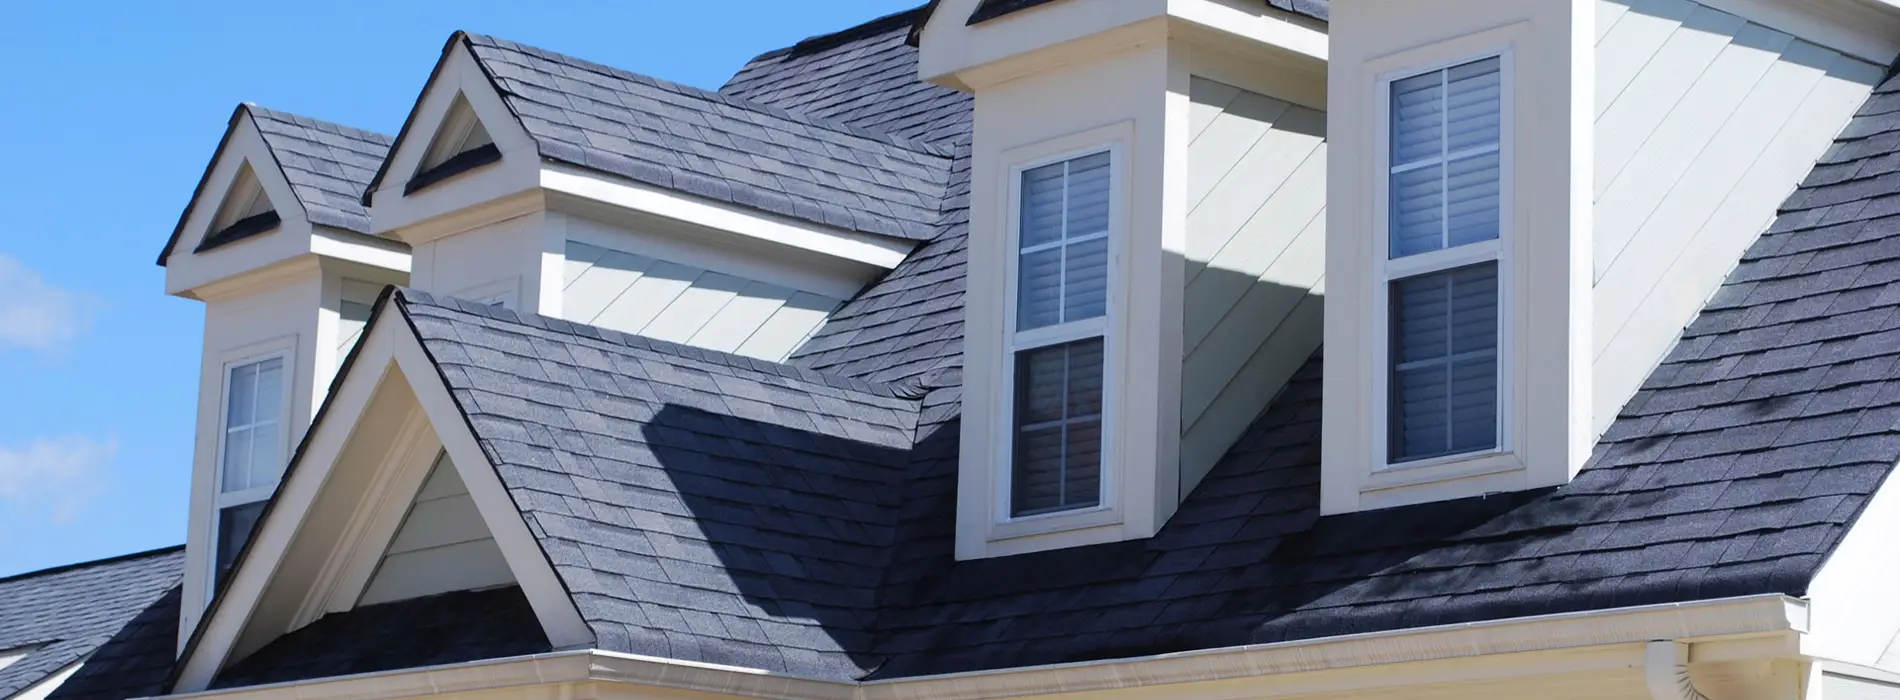 Find Residential Roofing Contractors in Prescott, AZ. Professionals Provide The Best Residential Roofing Services - Cowtown Roofing LLC 